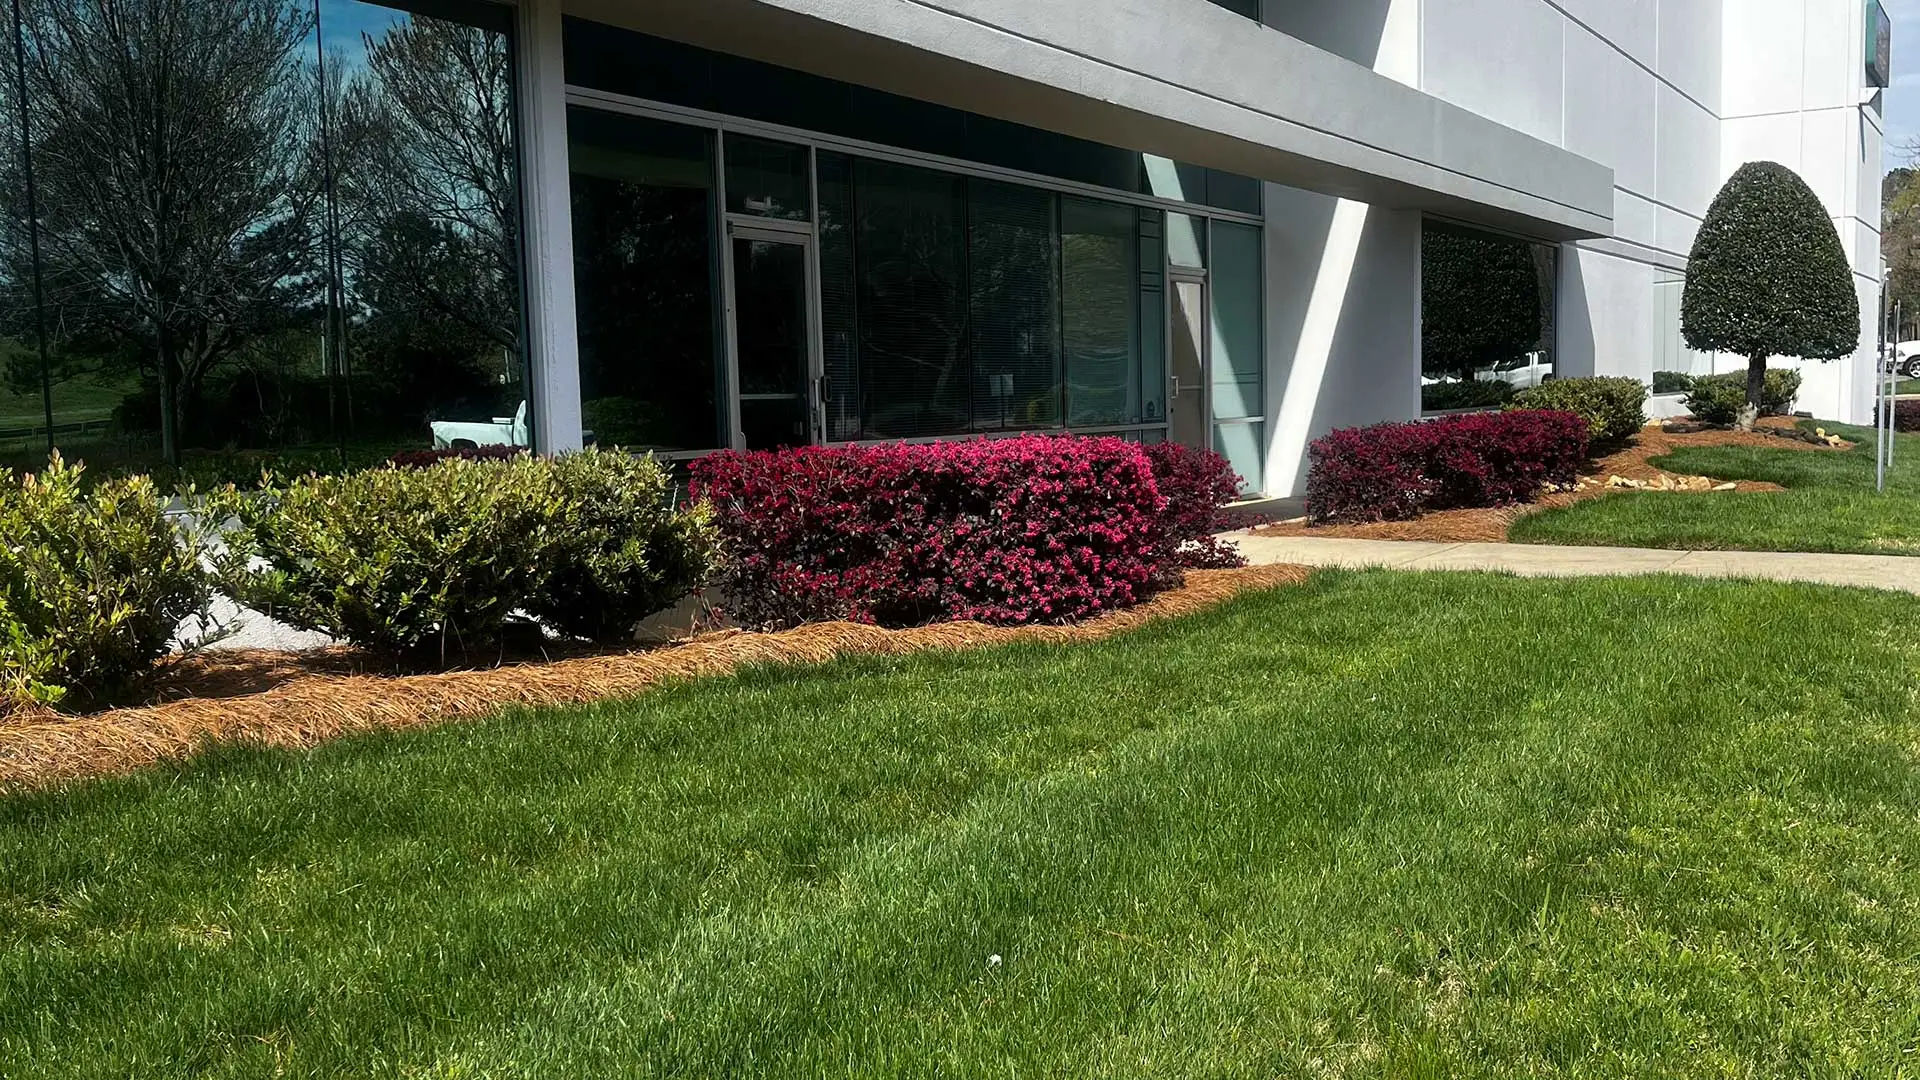 Our work maintaining an office building in a business park.